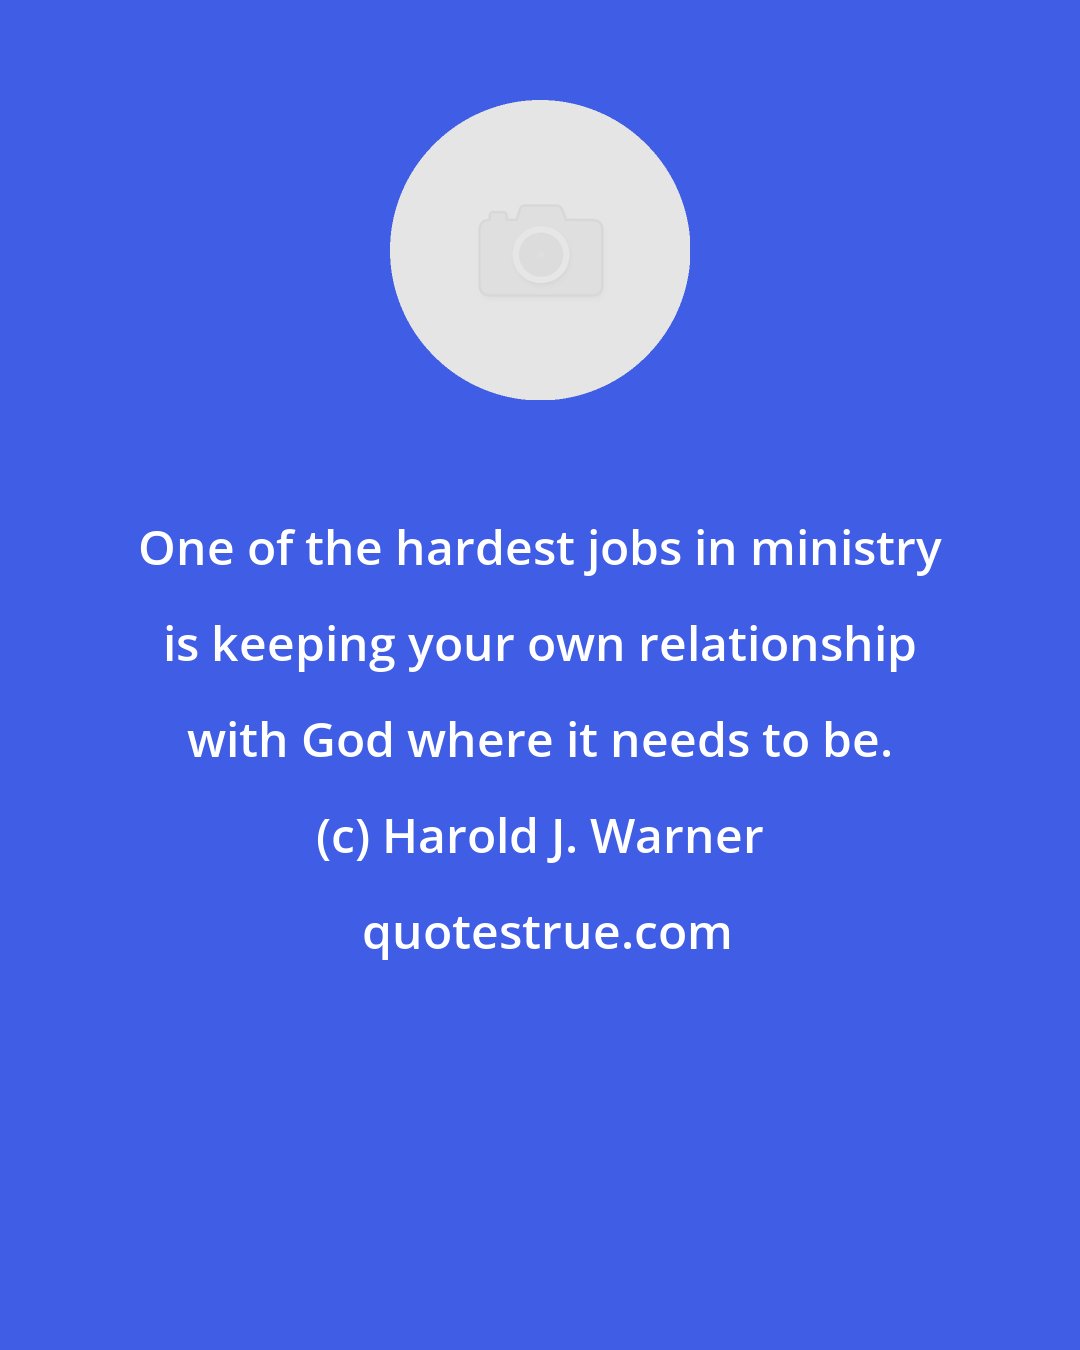 Harold J. Warner: One of the hardest jobs in ministry is keeping your own relationship with God where it needs to be.